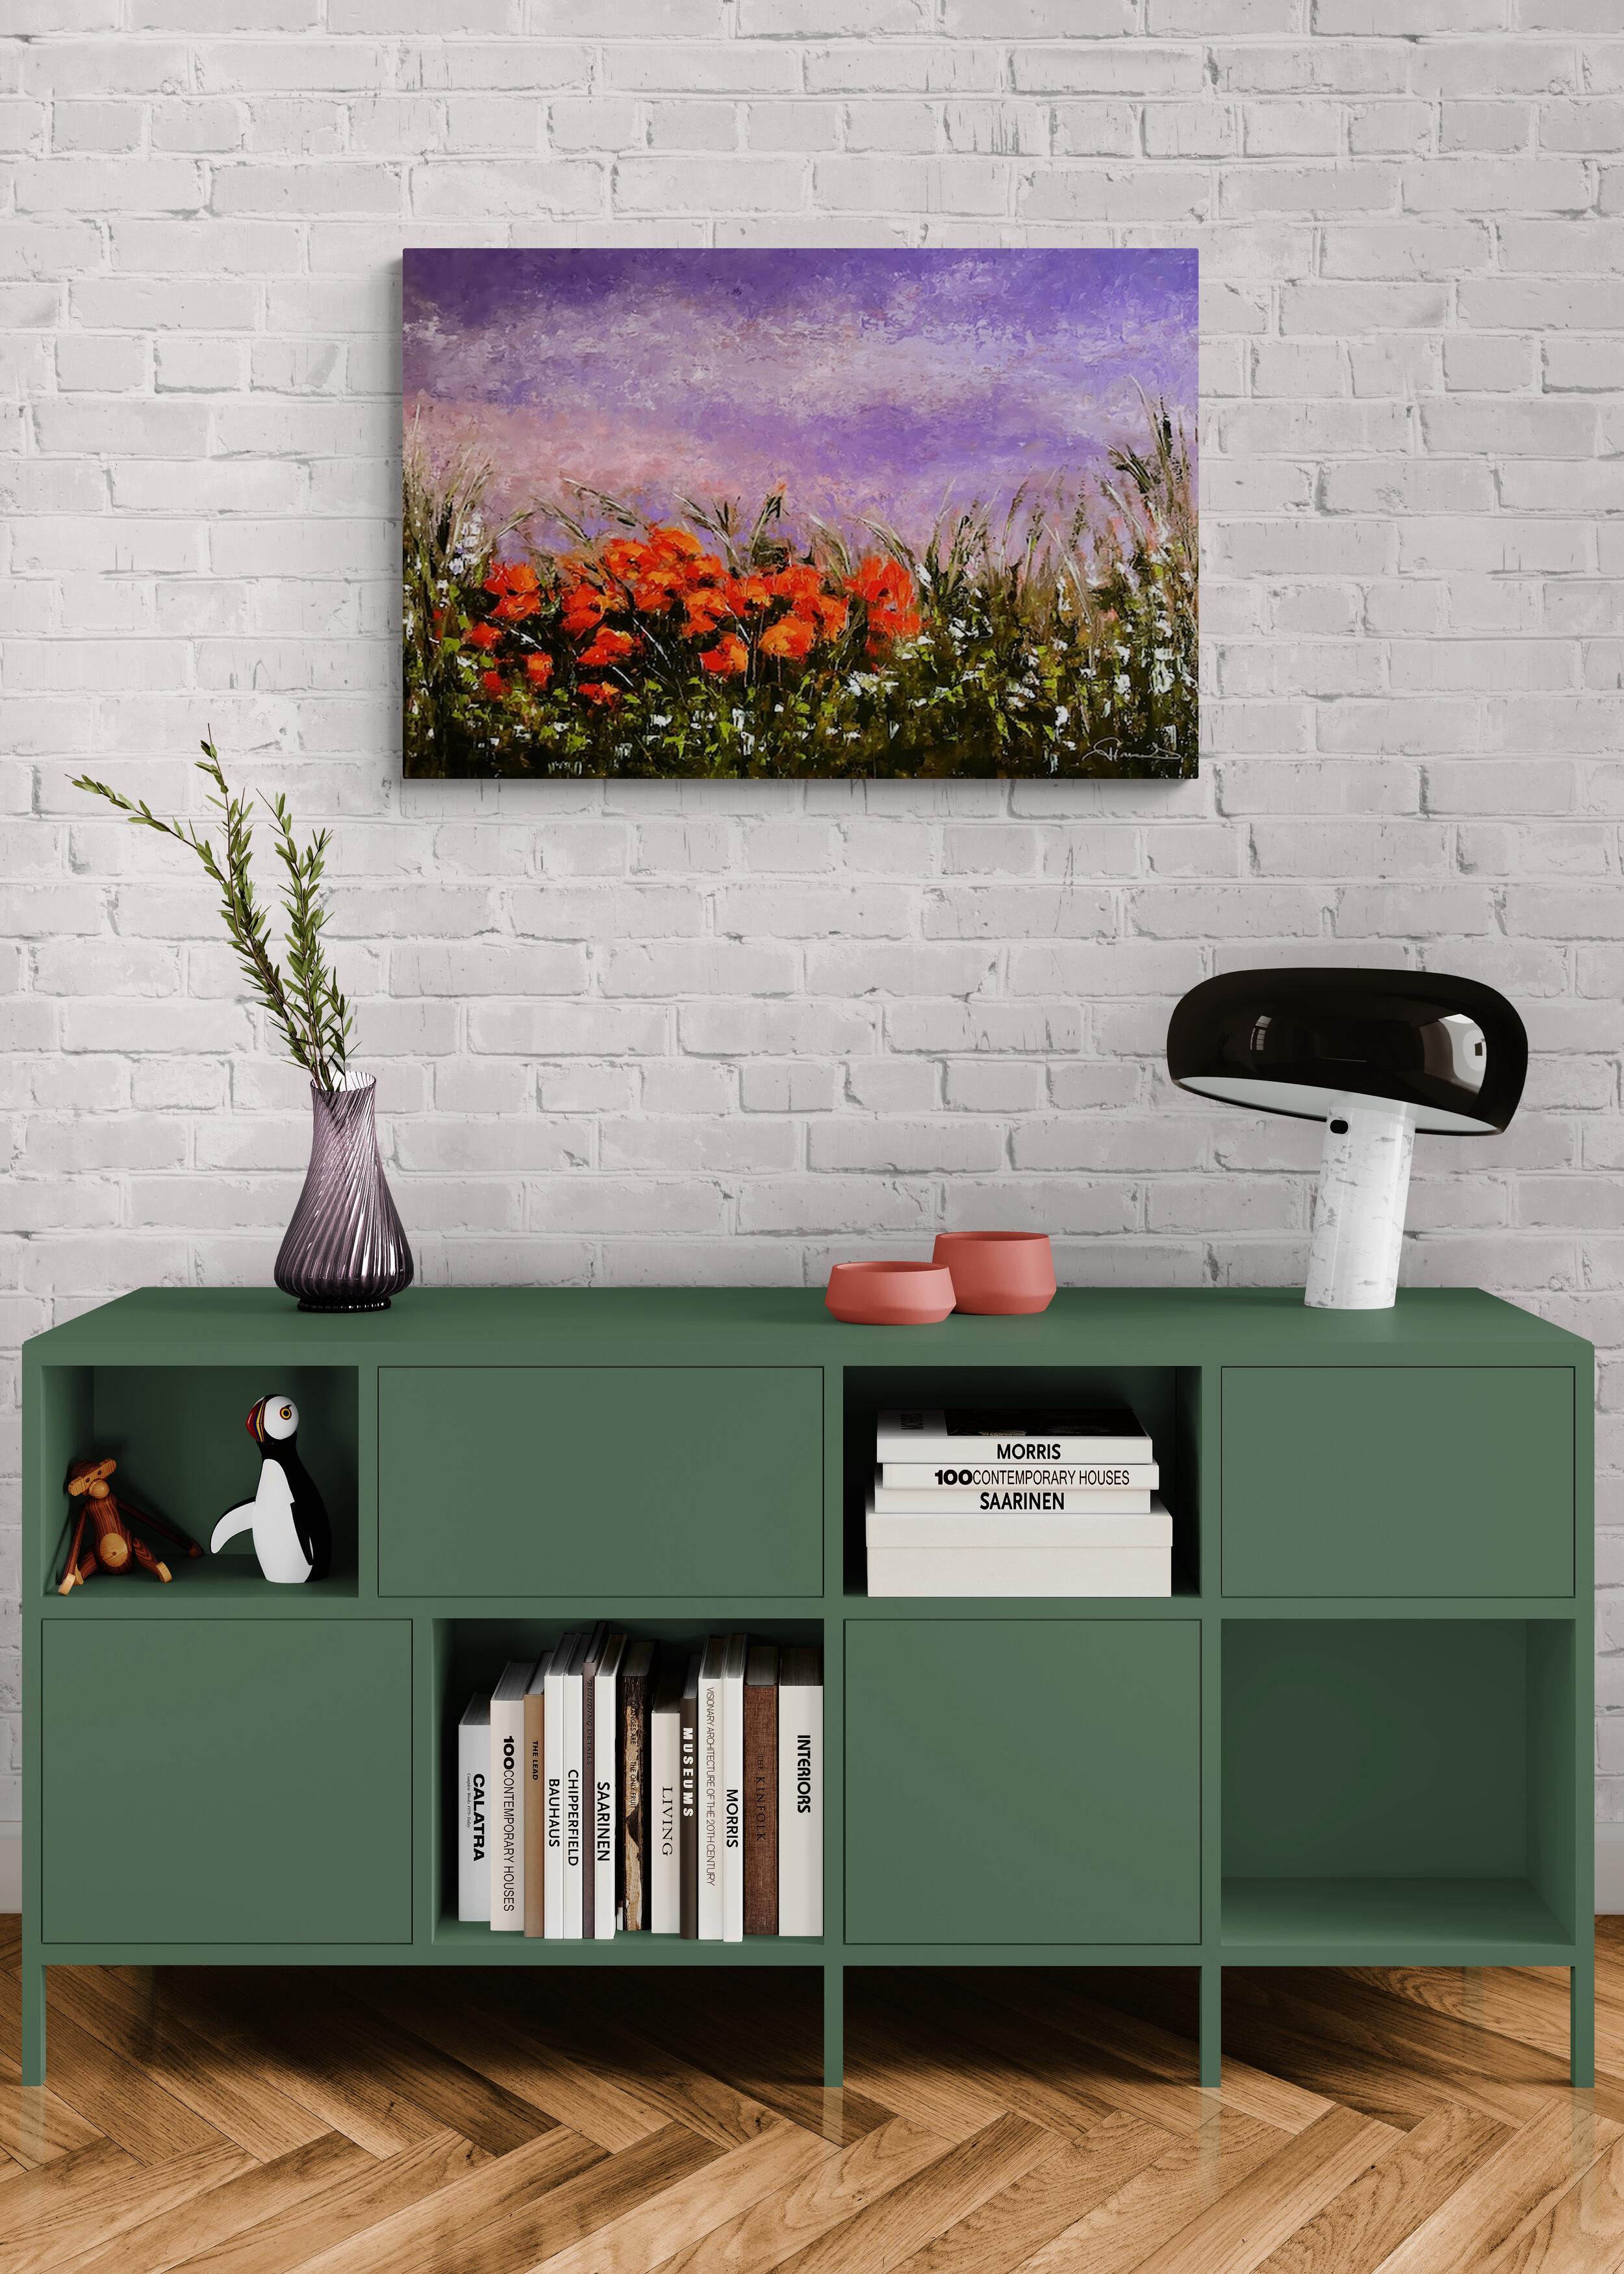 Genevieve Hamel
When the Sun Goes Down
Oil on Wood Panel
Year: 2024
Size: 24 x 36 x 1.625 inches
Signed by hand
COA provided
Ref.: 924802-2100

Standing out from the crowd, a bundle of orange poppies shines through a field of white wildflowers under